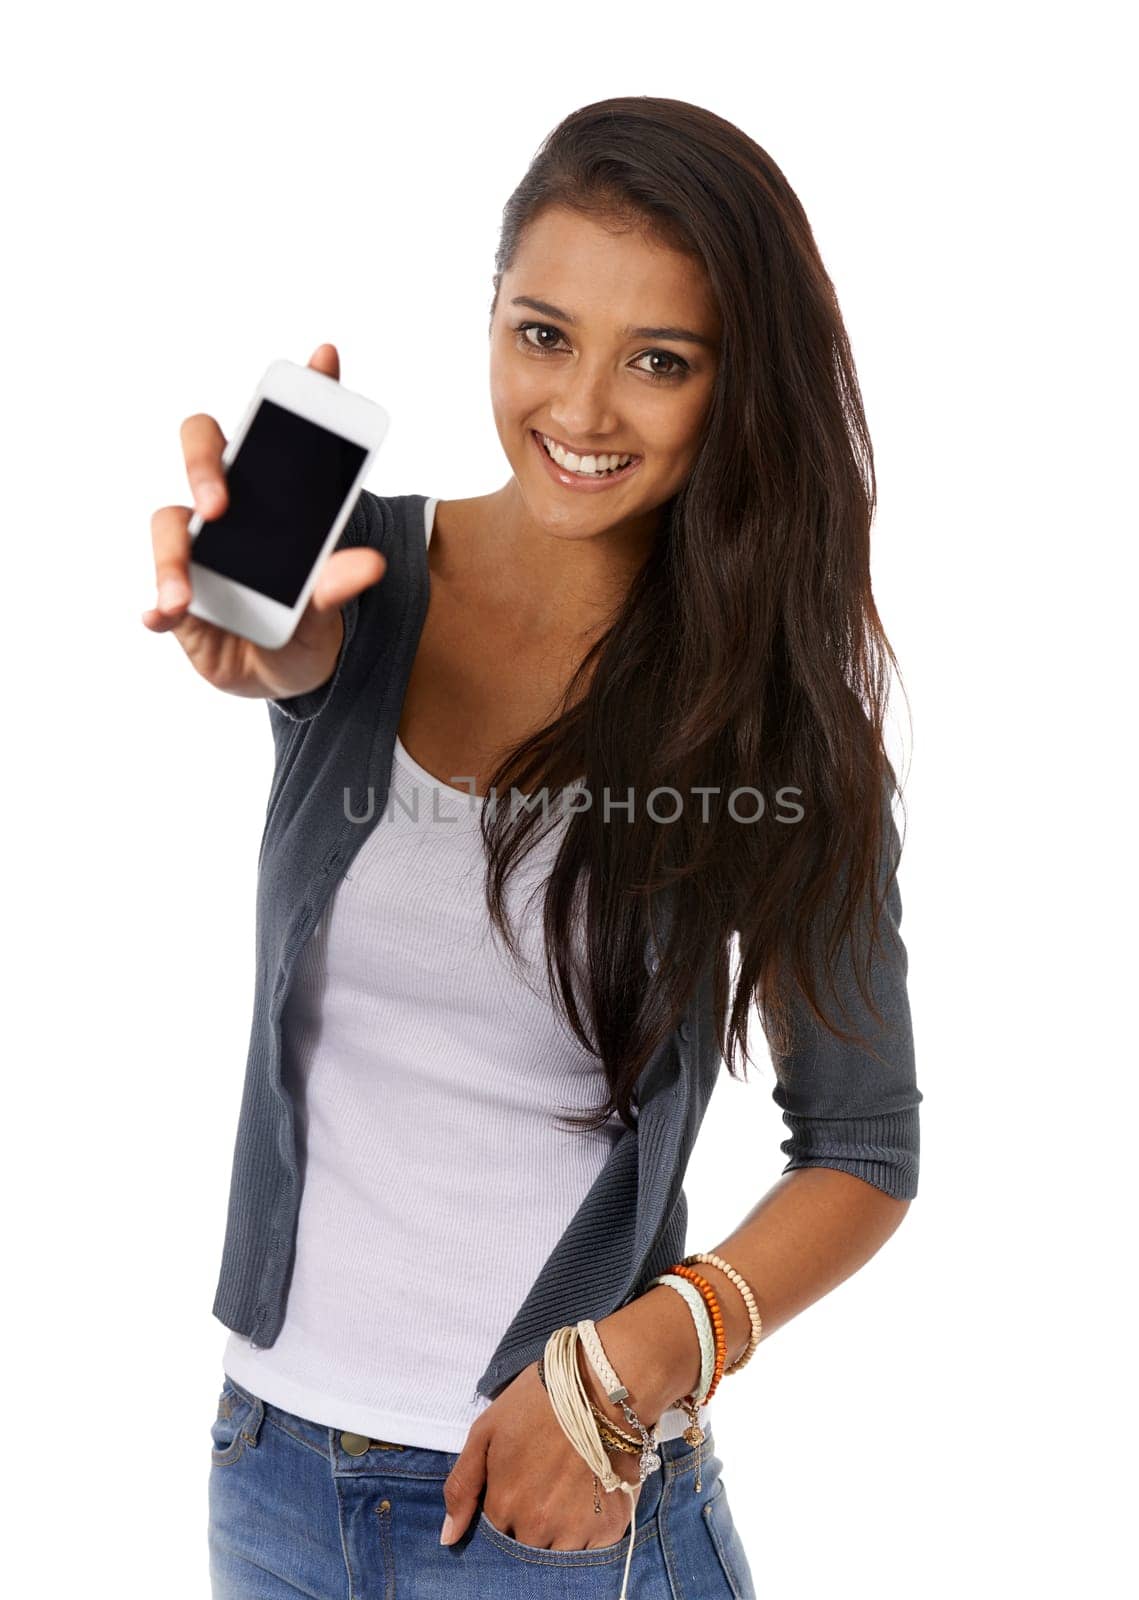 Phone screen, smile and portrait of woman in studio showing technology for networking. Happy, communication and female person with cellphone for online or internet browsing by white background